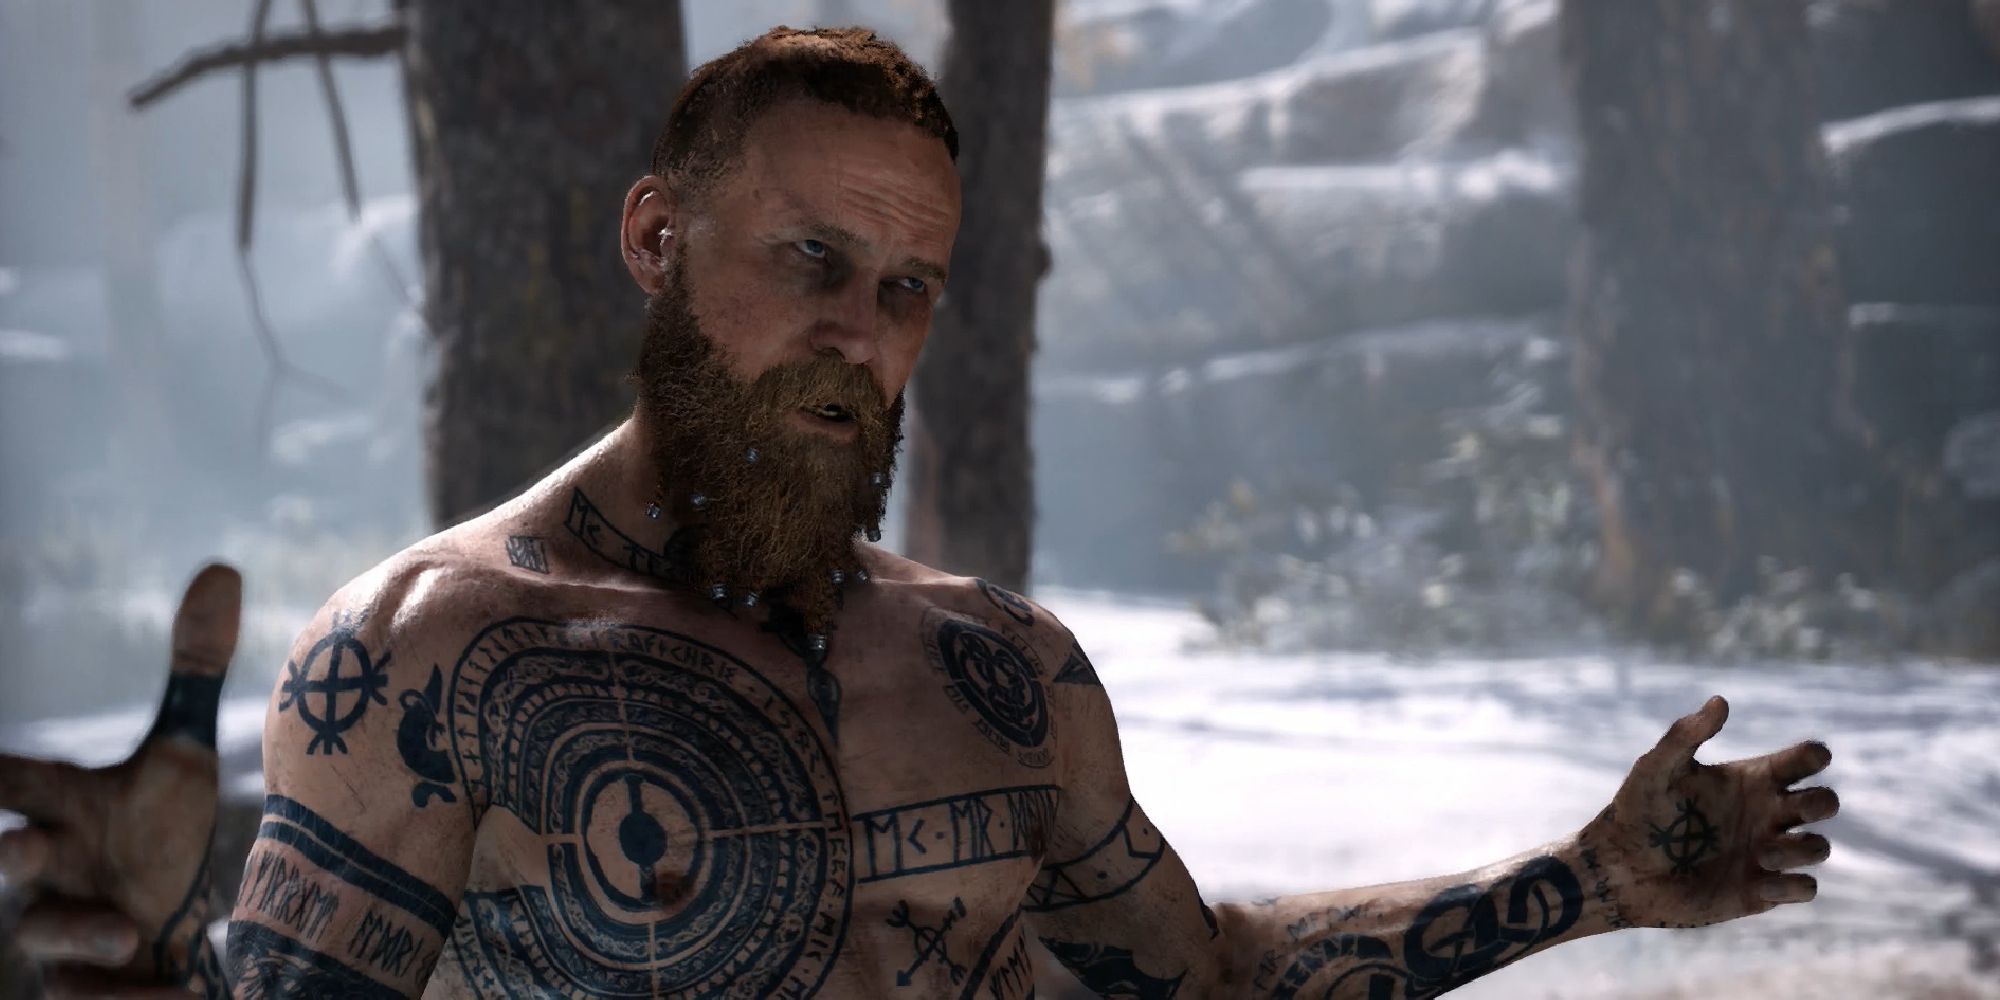 Baldur from God of War, addressing an unseen person with his hands spread. His exposed chest and arms are a gallery of tattoos. 